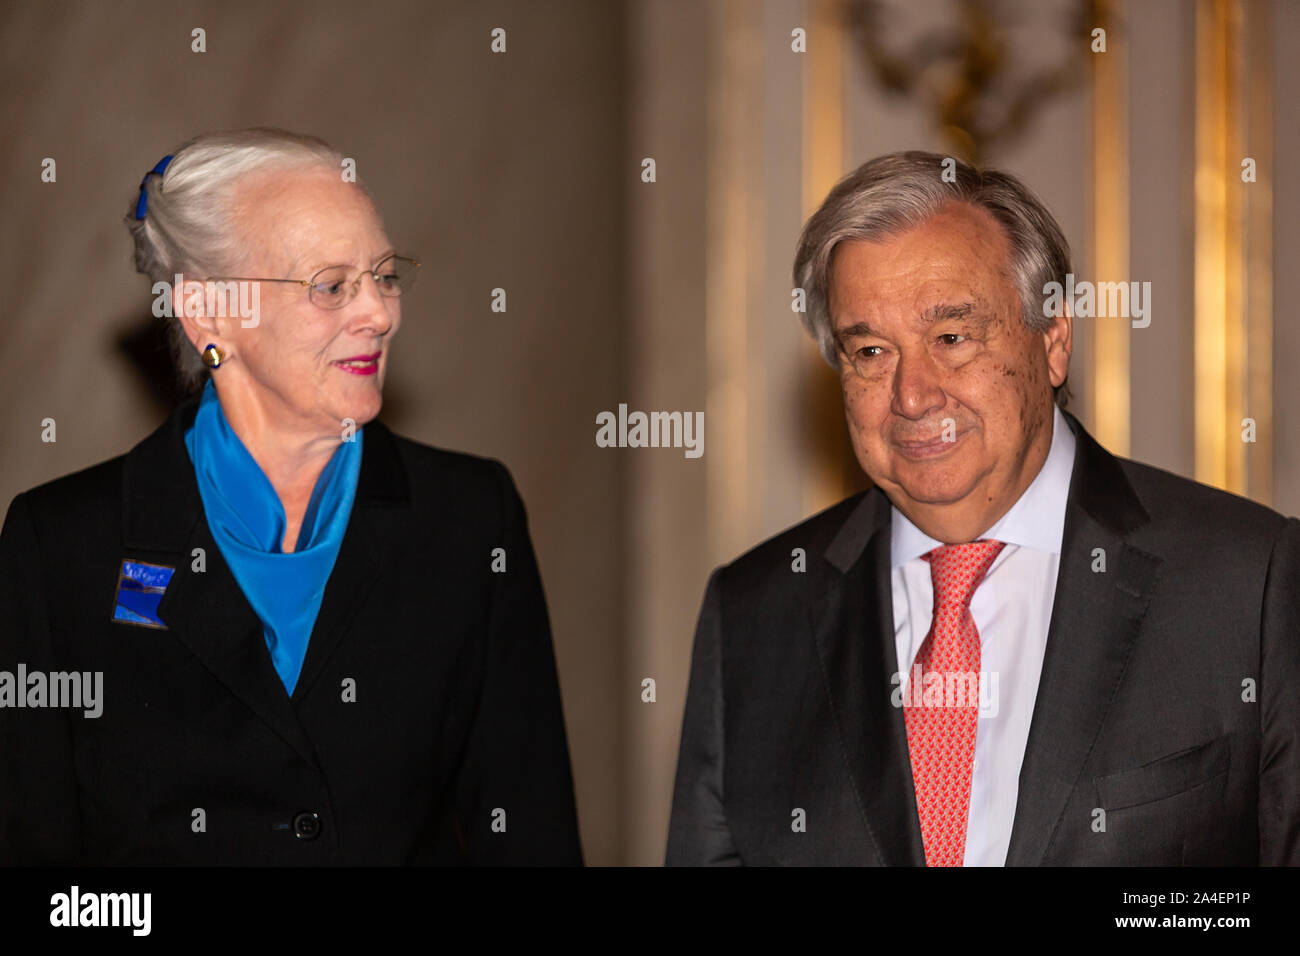 COPENHAGEN, DENMARK -  OCTOBER 10, 2019: Queen Margrethe of Denmark receives António Guterres, Secretary-General of the United Nations, at Amalienborg Palace on the occasion of the C40 World Mayors Summit. Guterres participated this Thursday at a press conference at the Summit and later with the Danish Prime Minister Mette Frederiksen and today he held a speech to the worlds mayors together with the Prime Minister. (Photo by Ole Jensen/Getty Images) Stock Photo